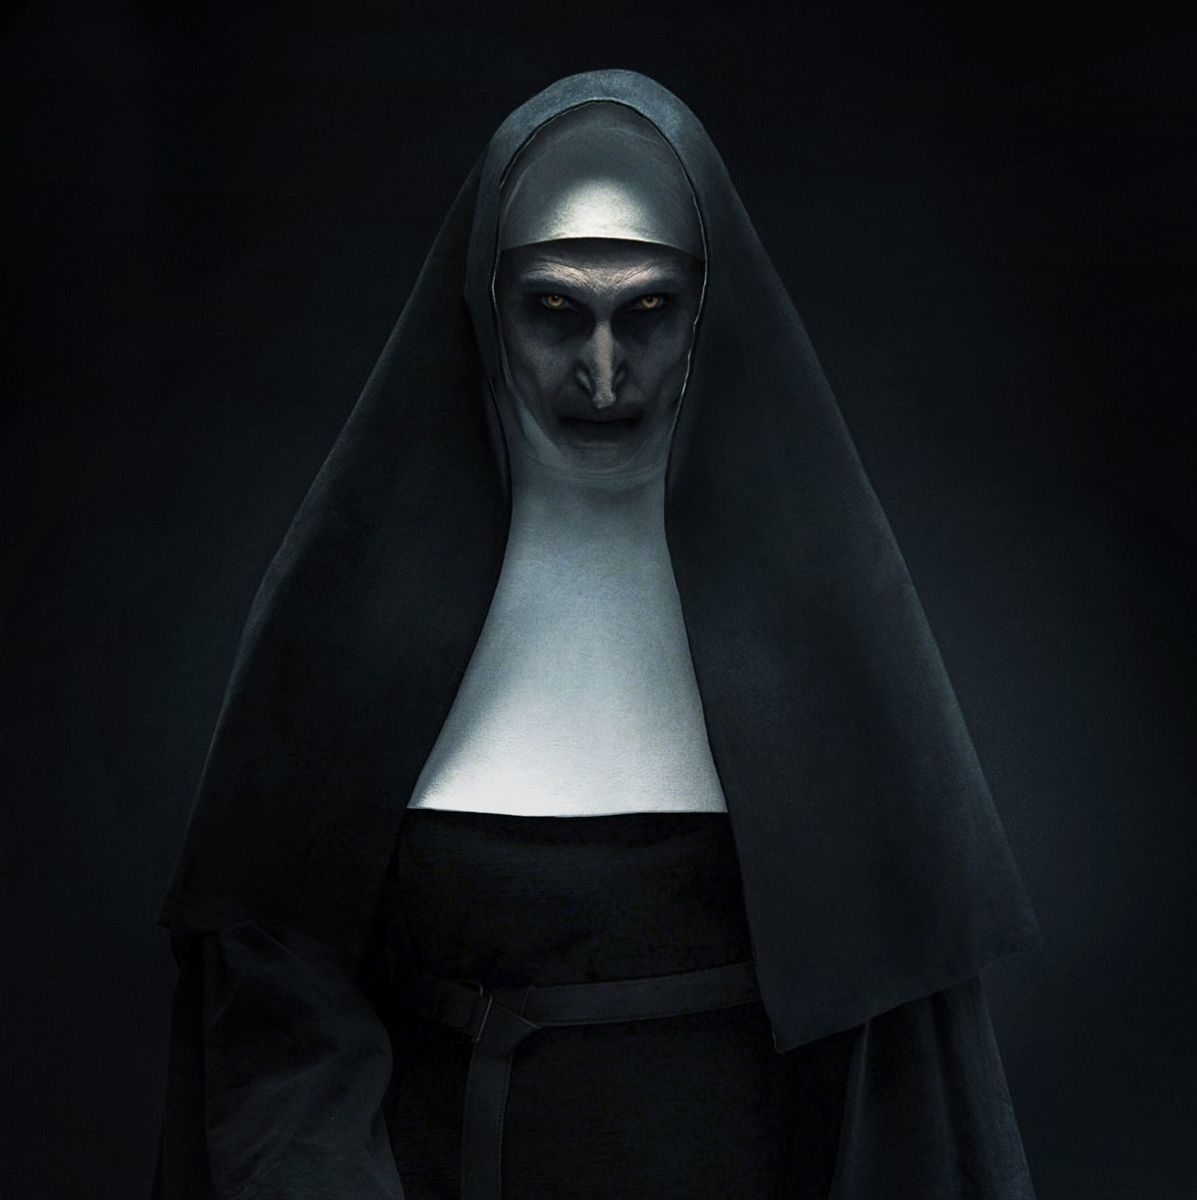 Top 10 Haunting Horror Movies To Watch If You Liked 'The Nun'